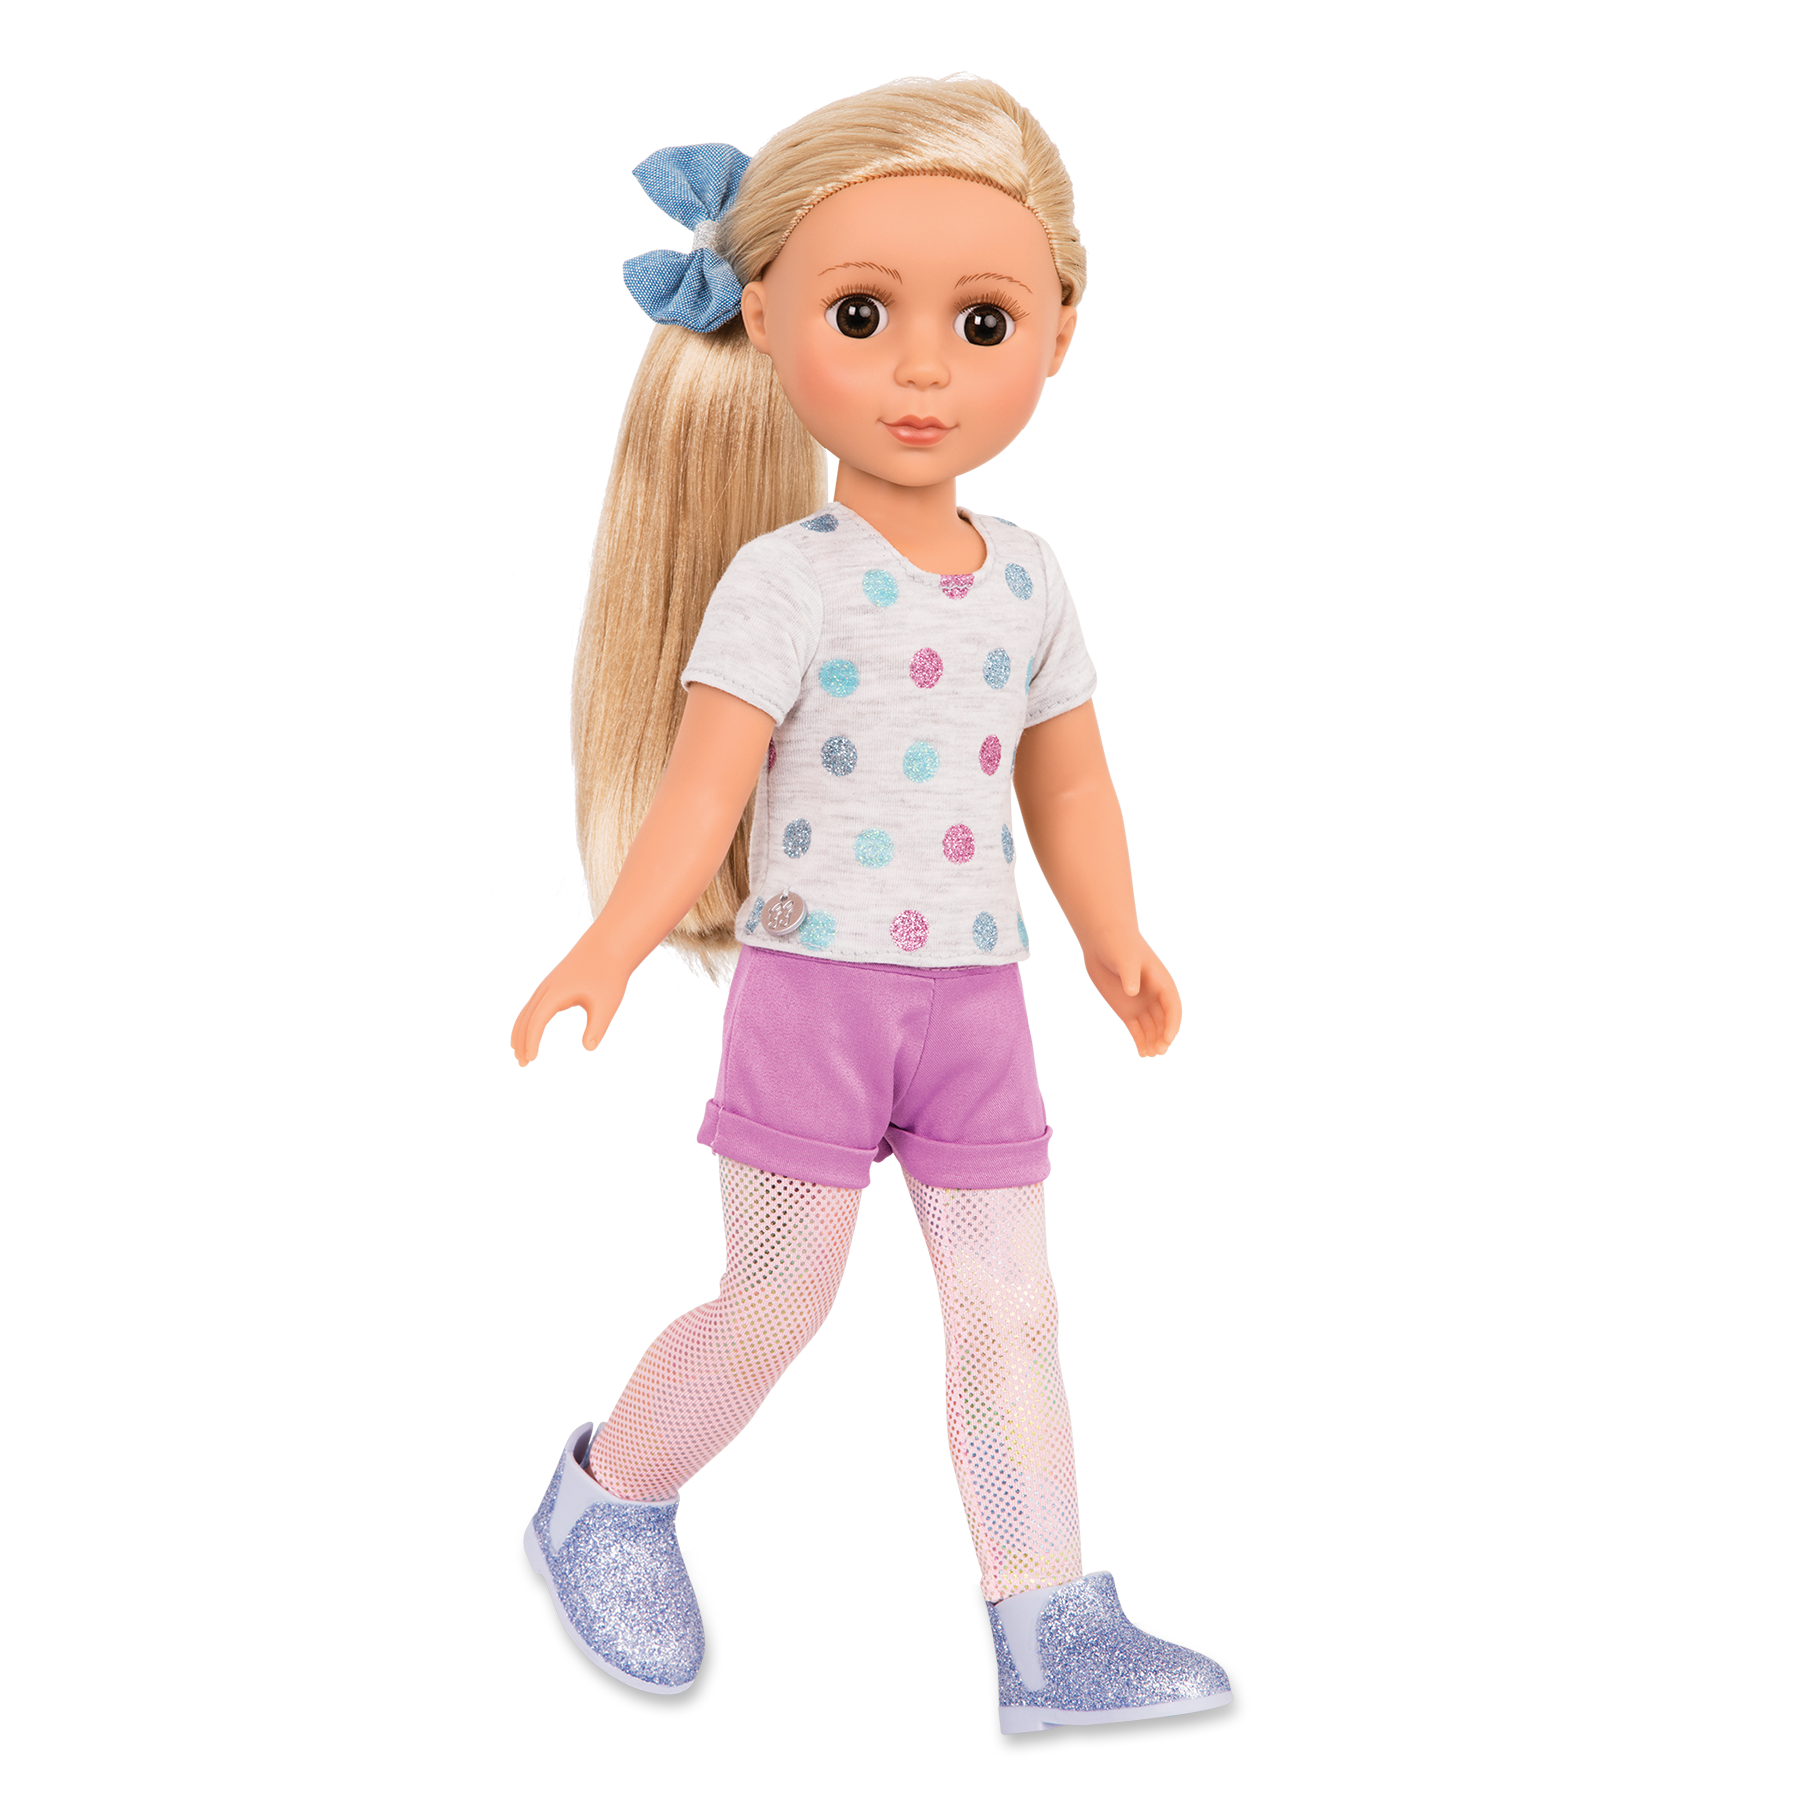 Glitter Girls - Candice 14-inch Poseable Fashion Doll - Dolls for Girls Age  3 & Up